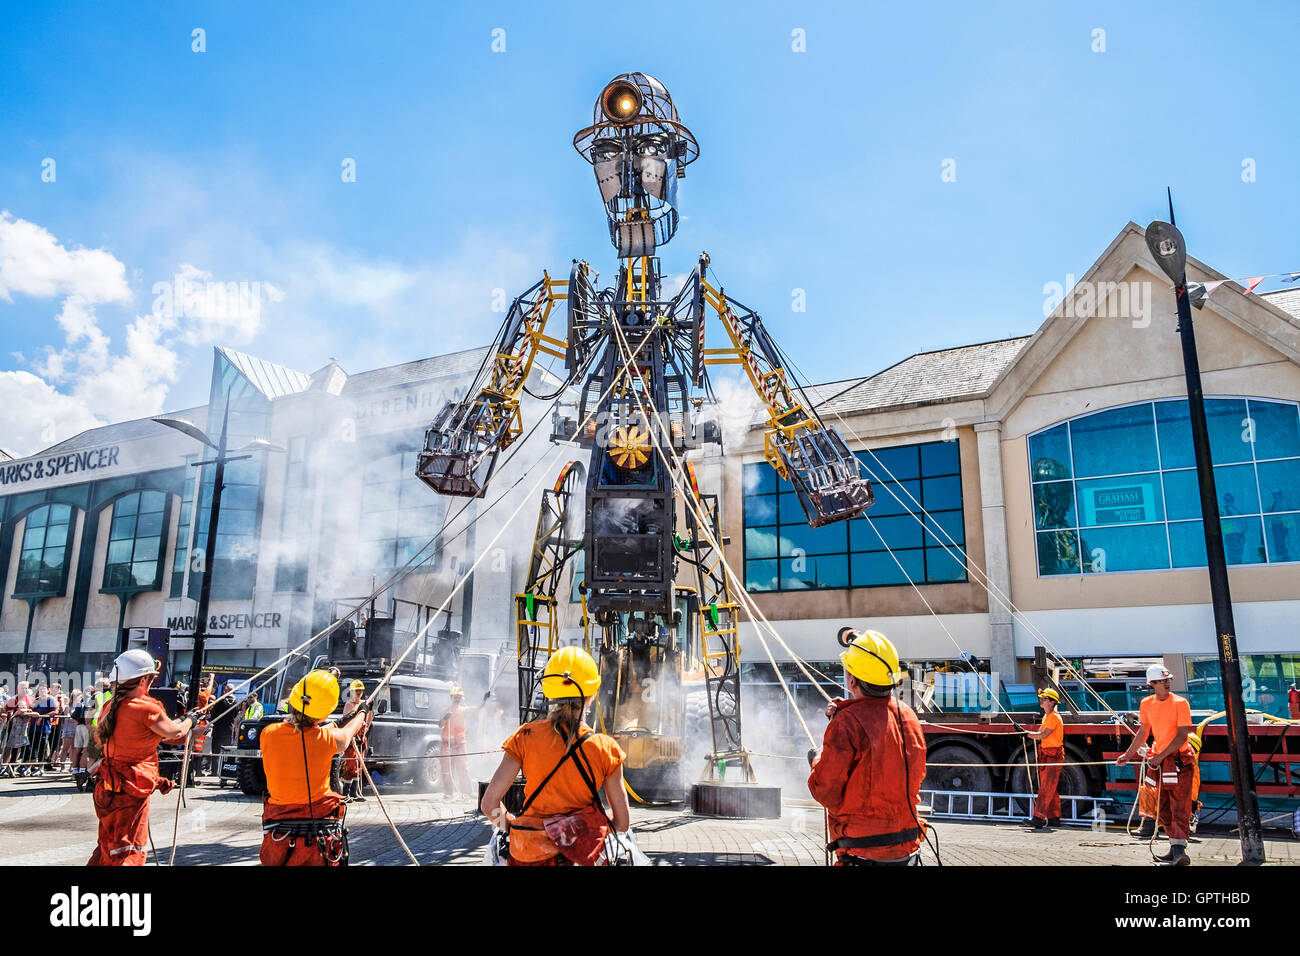 The ' Man Engine ' a 10 metre high mechanical puppet in Turo, Cornwall, UK. Stock Photo